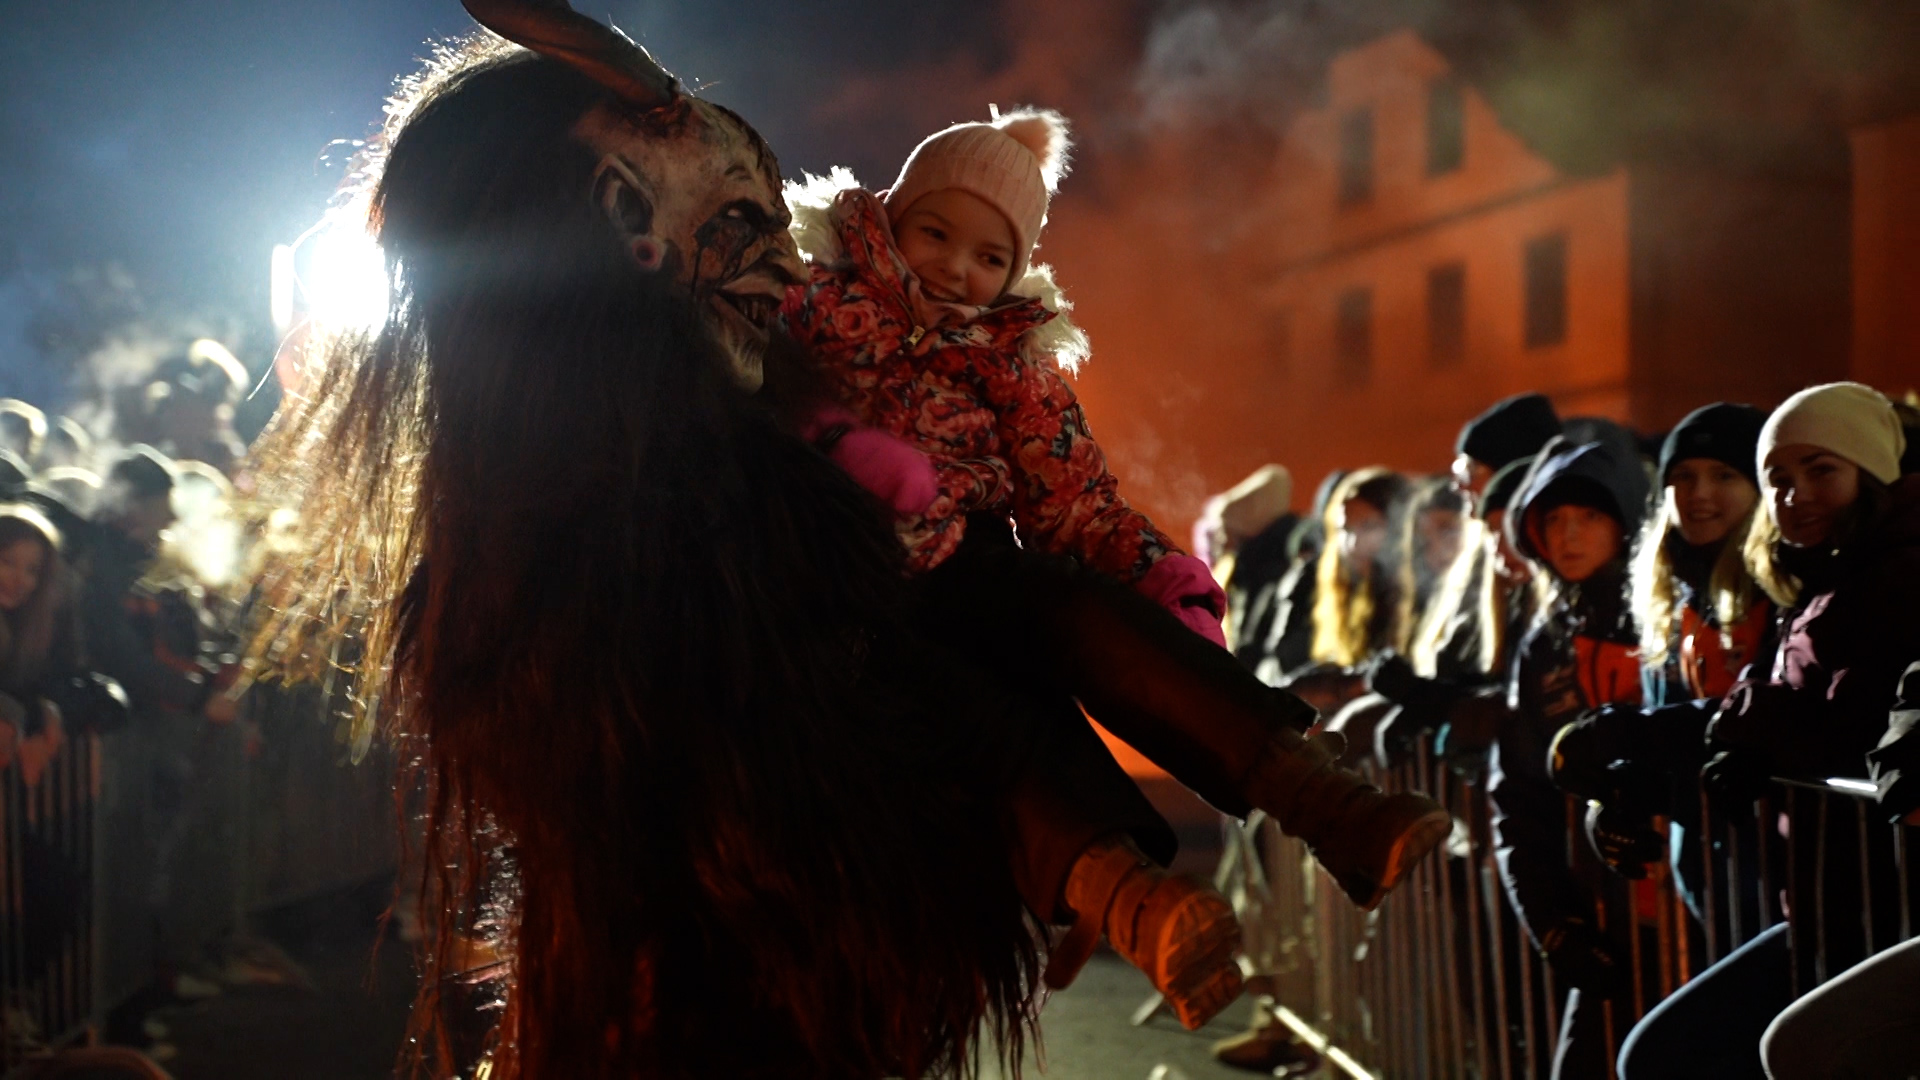 Some Krampus impersonators are trying to take the fear from small children by carrying them around. /CGTN/Andreas Gasser